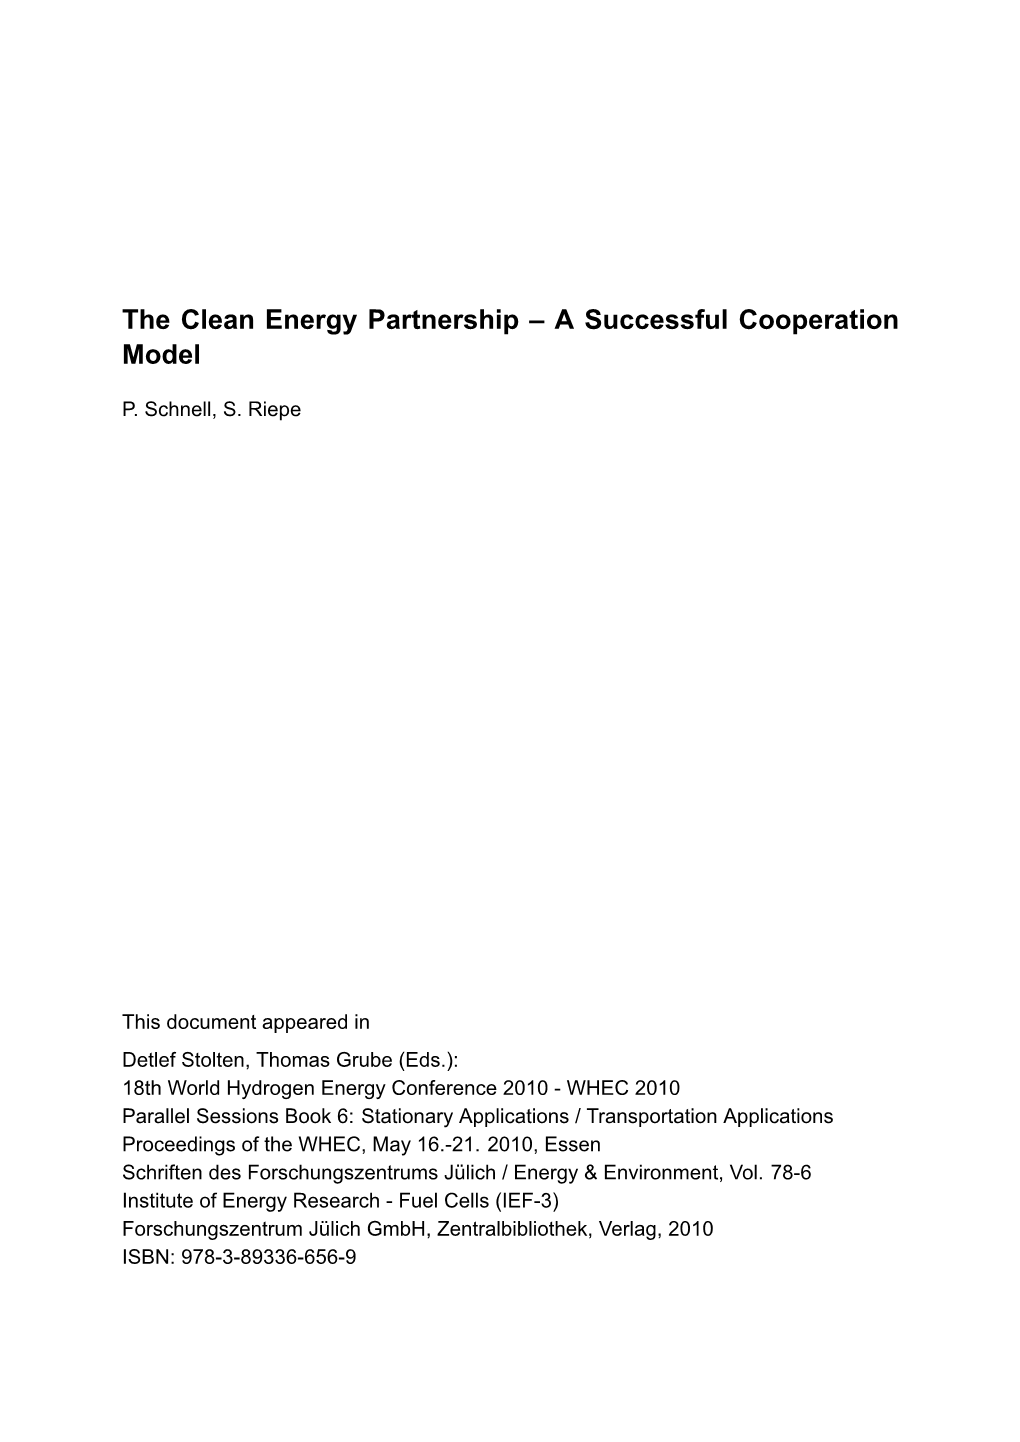 The Clean Energy Partnership – a Successful Cooperation Model